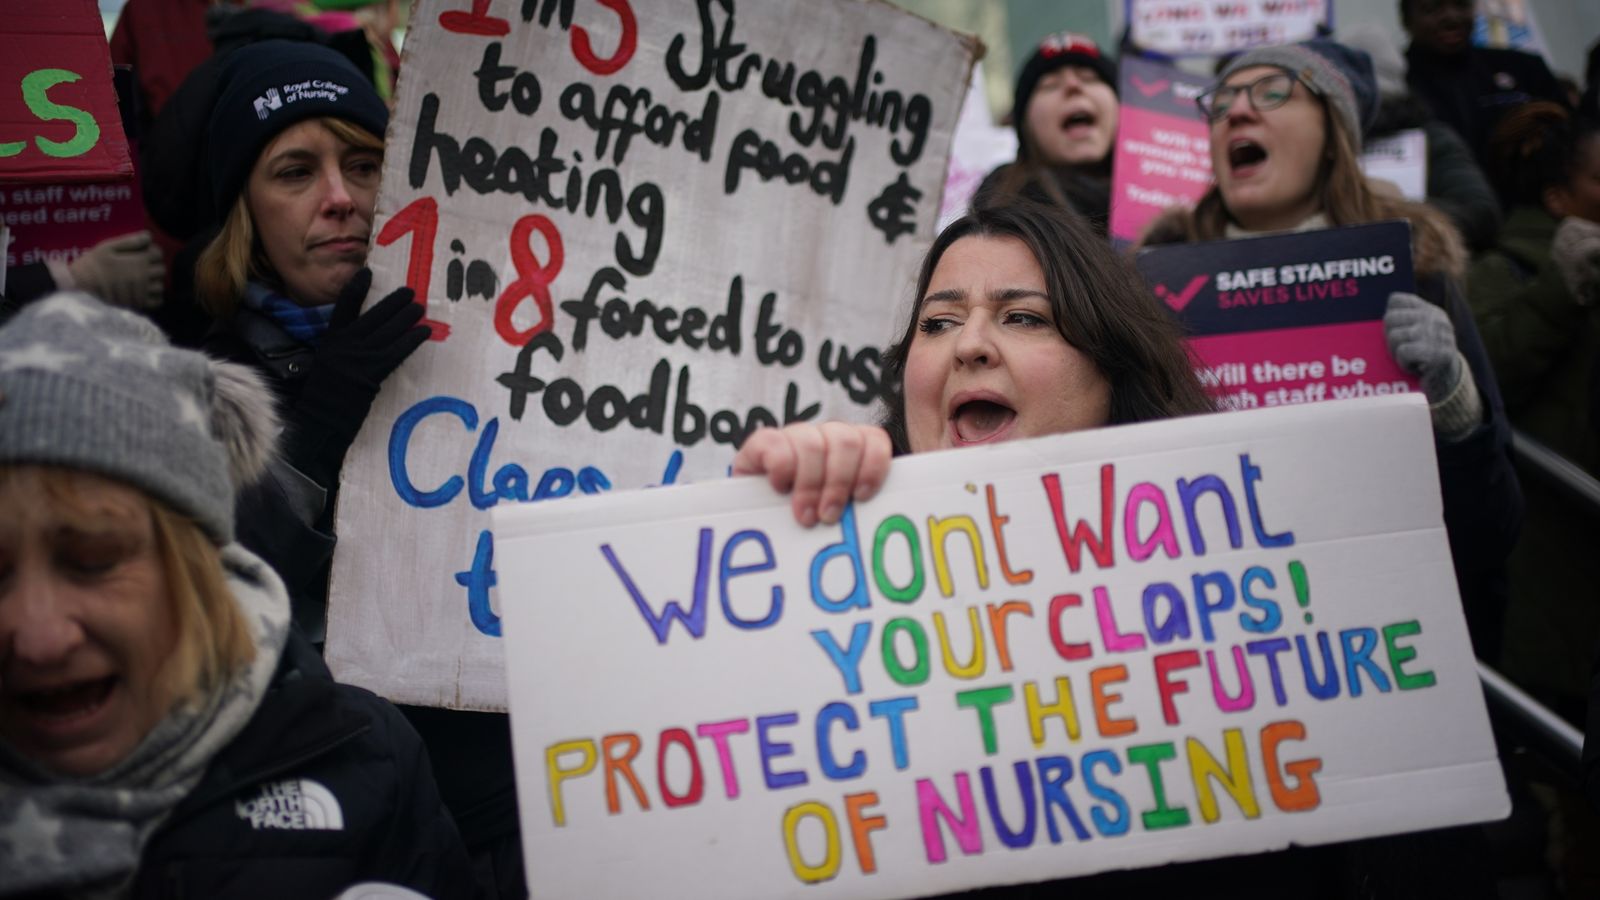 NHS leaders making contingency plans as biggest walkout in its history looms